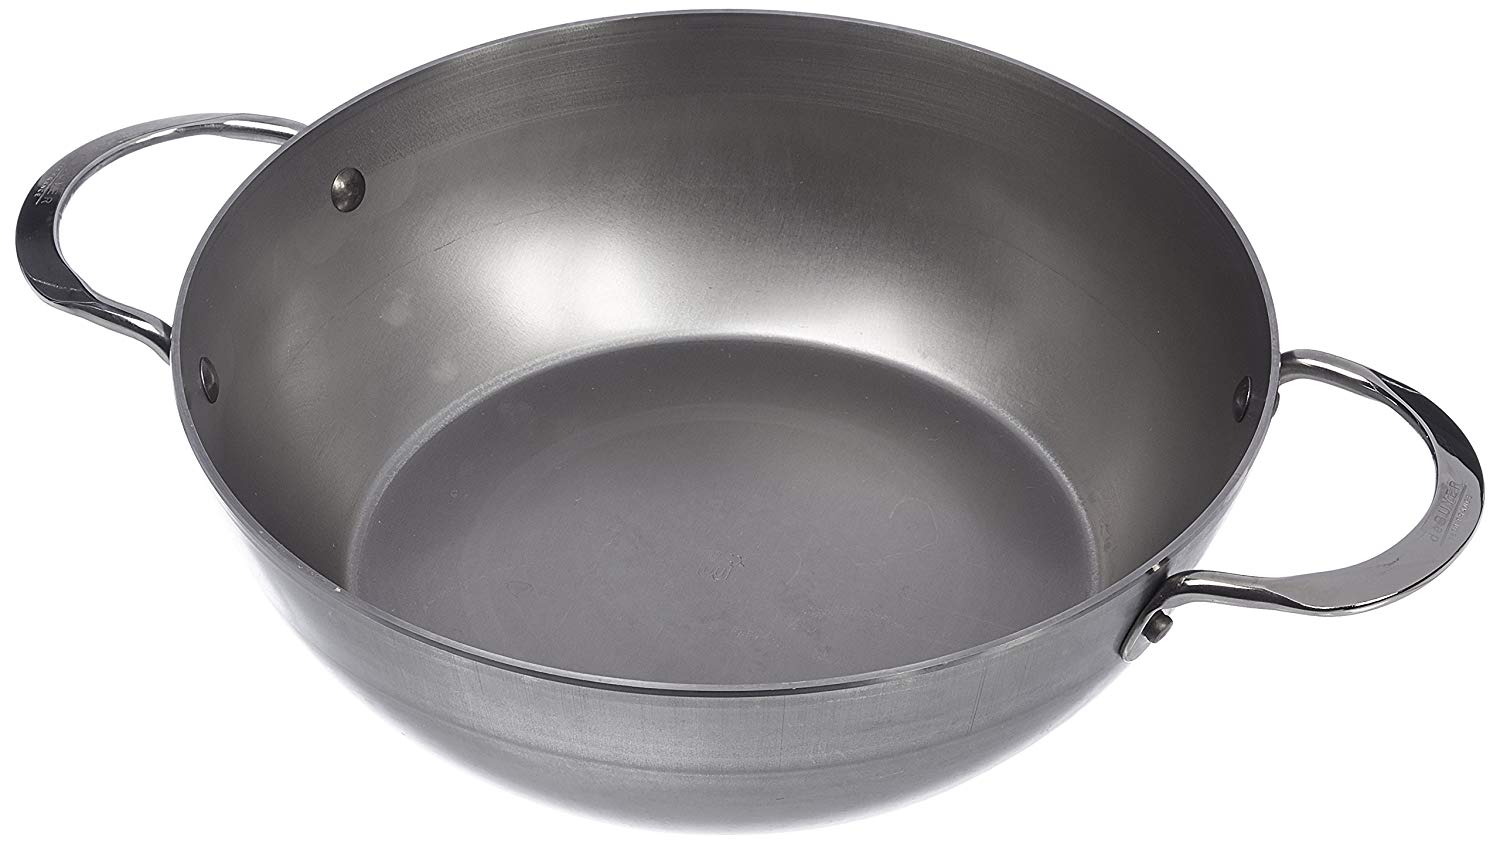 De Buyer MINERAL B Round Country Chef Carbon Steel Fry Pan